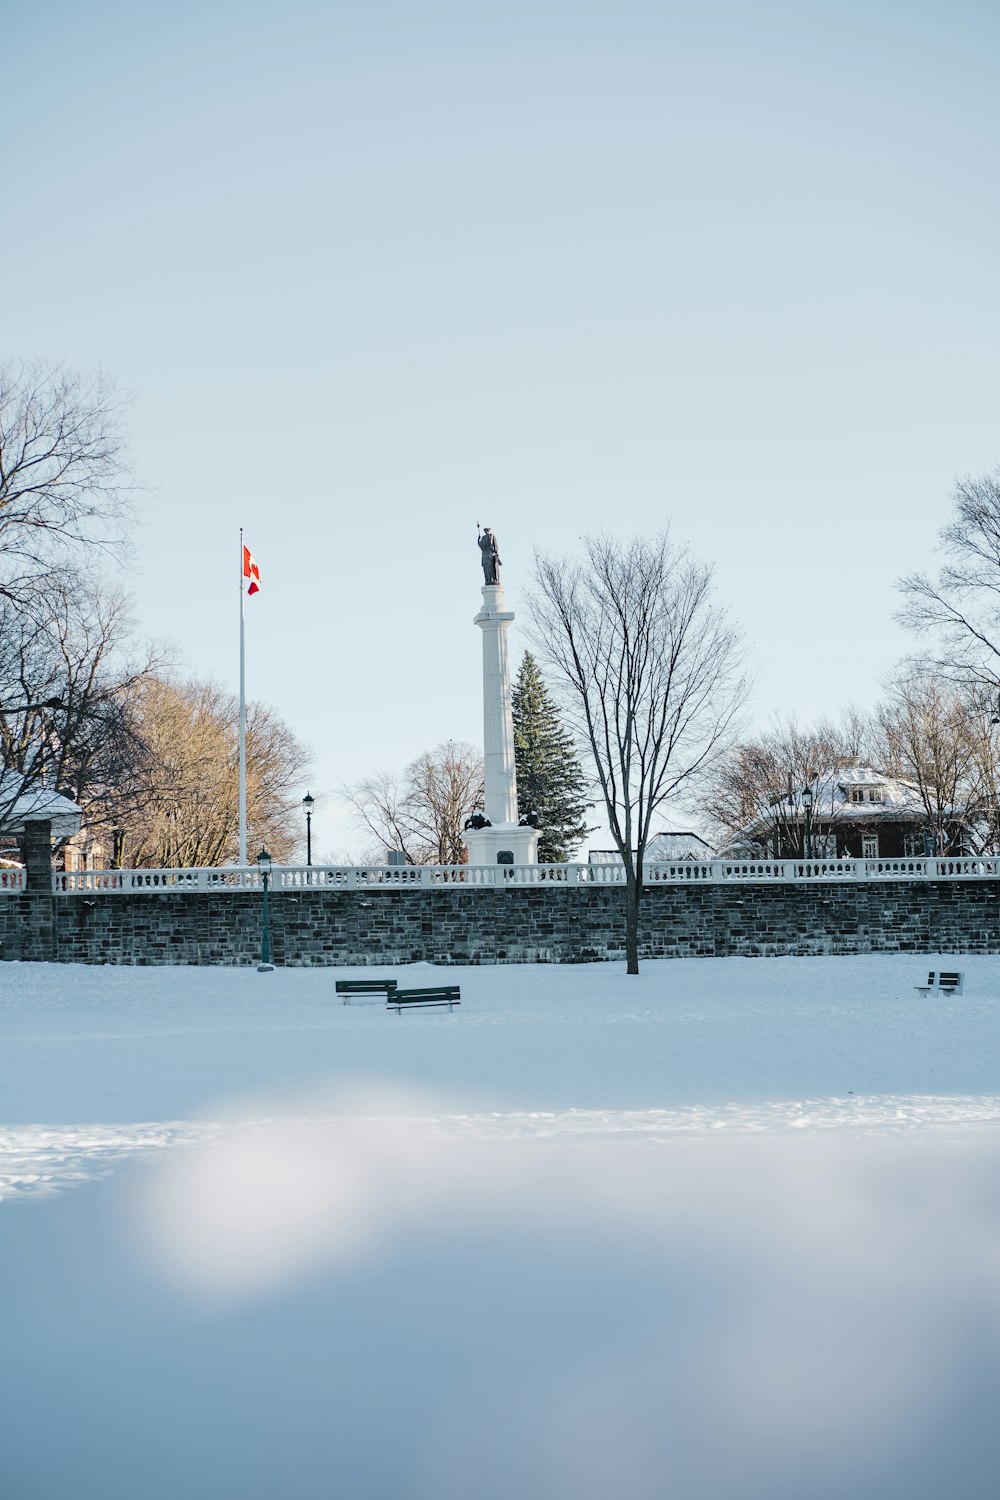 a snowy park with benches and a monument in the background